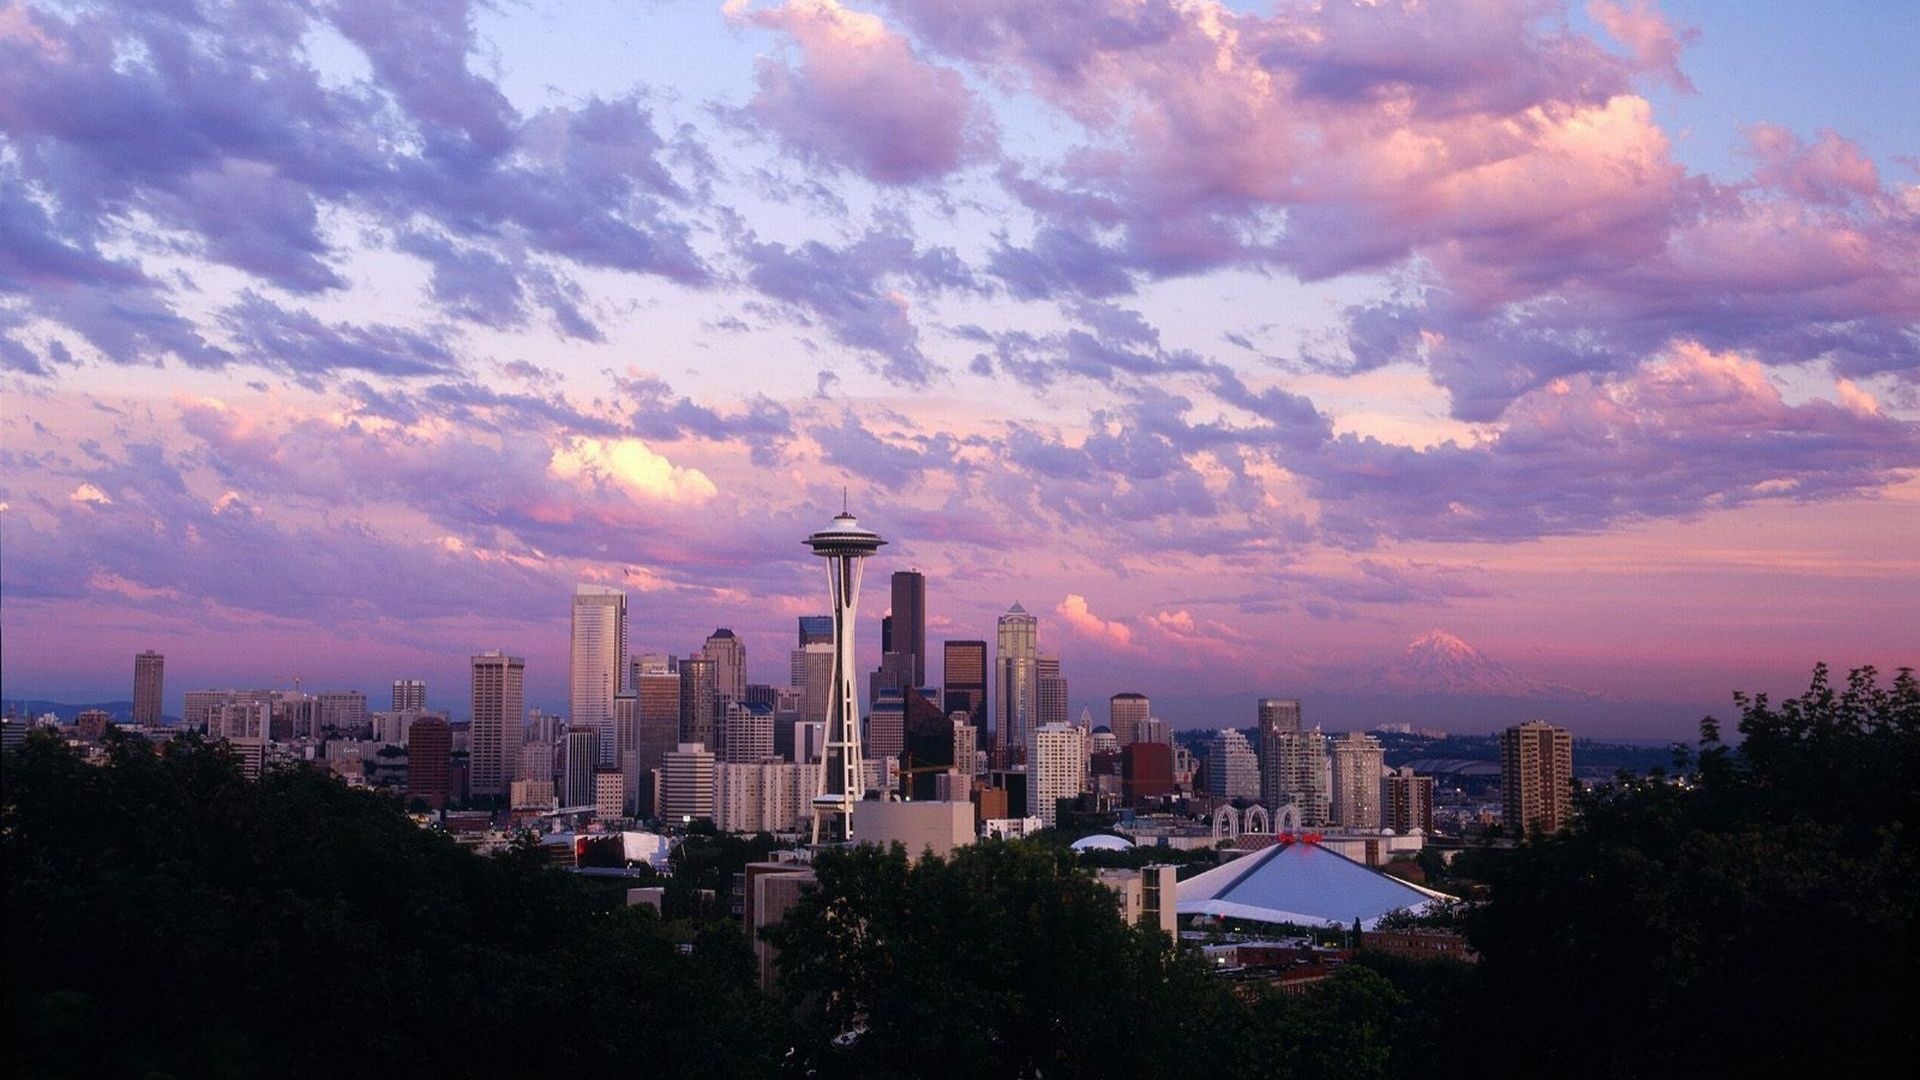 Seattle Skyline, HD wallpapers, Picturesque views, Seattle at its best, 1920x1080 Full HD Desktop